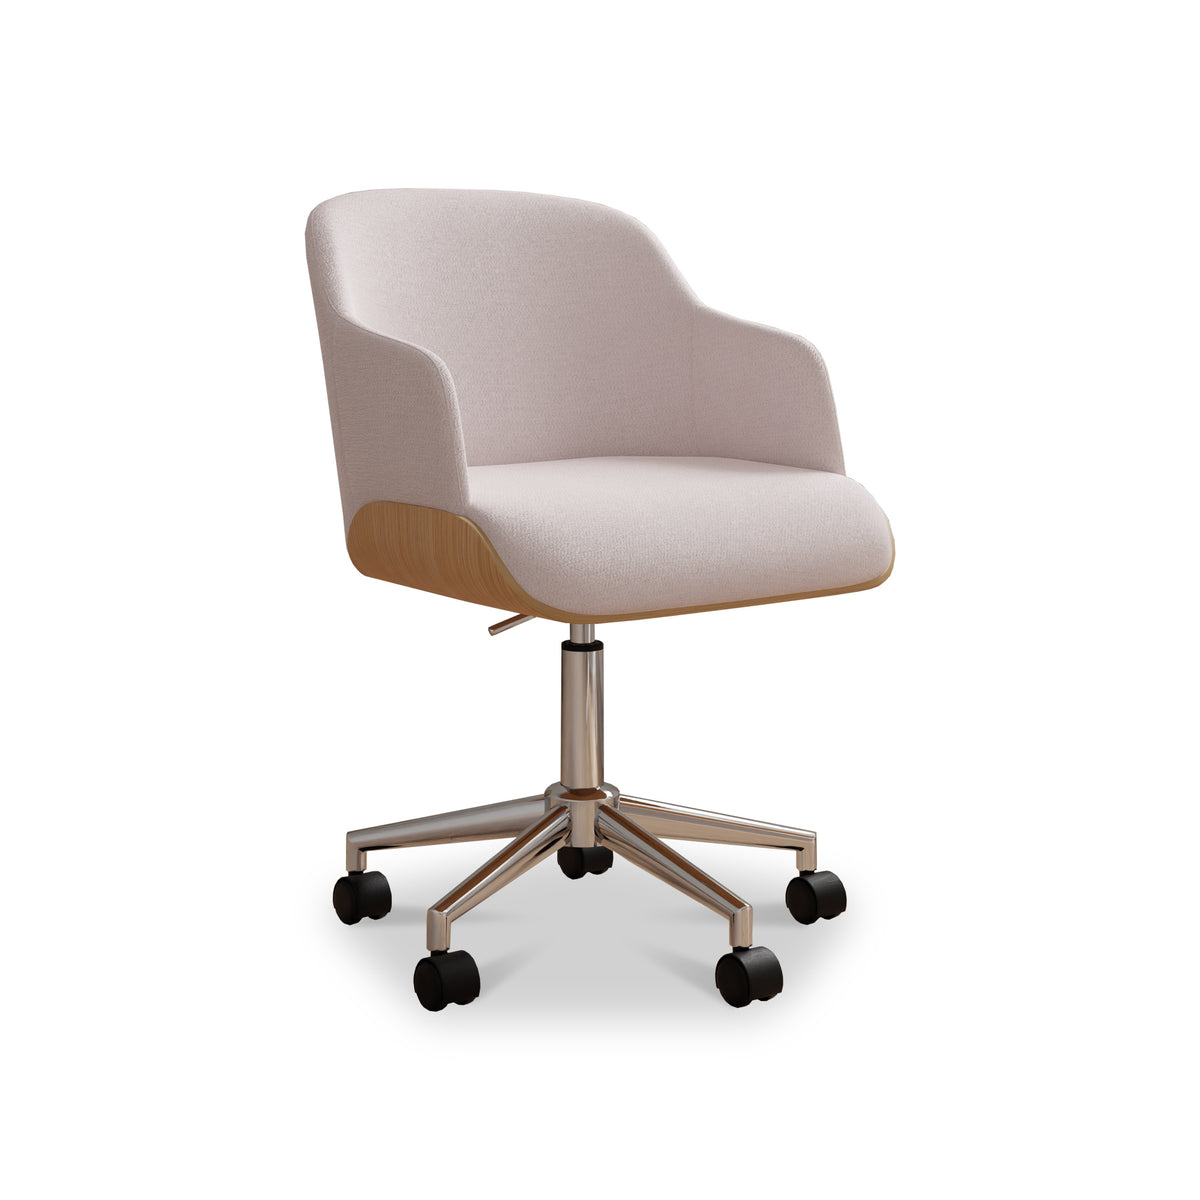 Hedda Height Adjustable Swivel Office Chair from Roseland Furniture